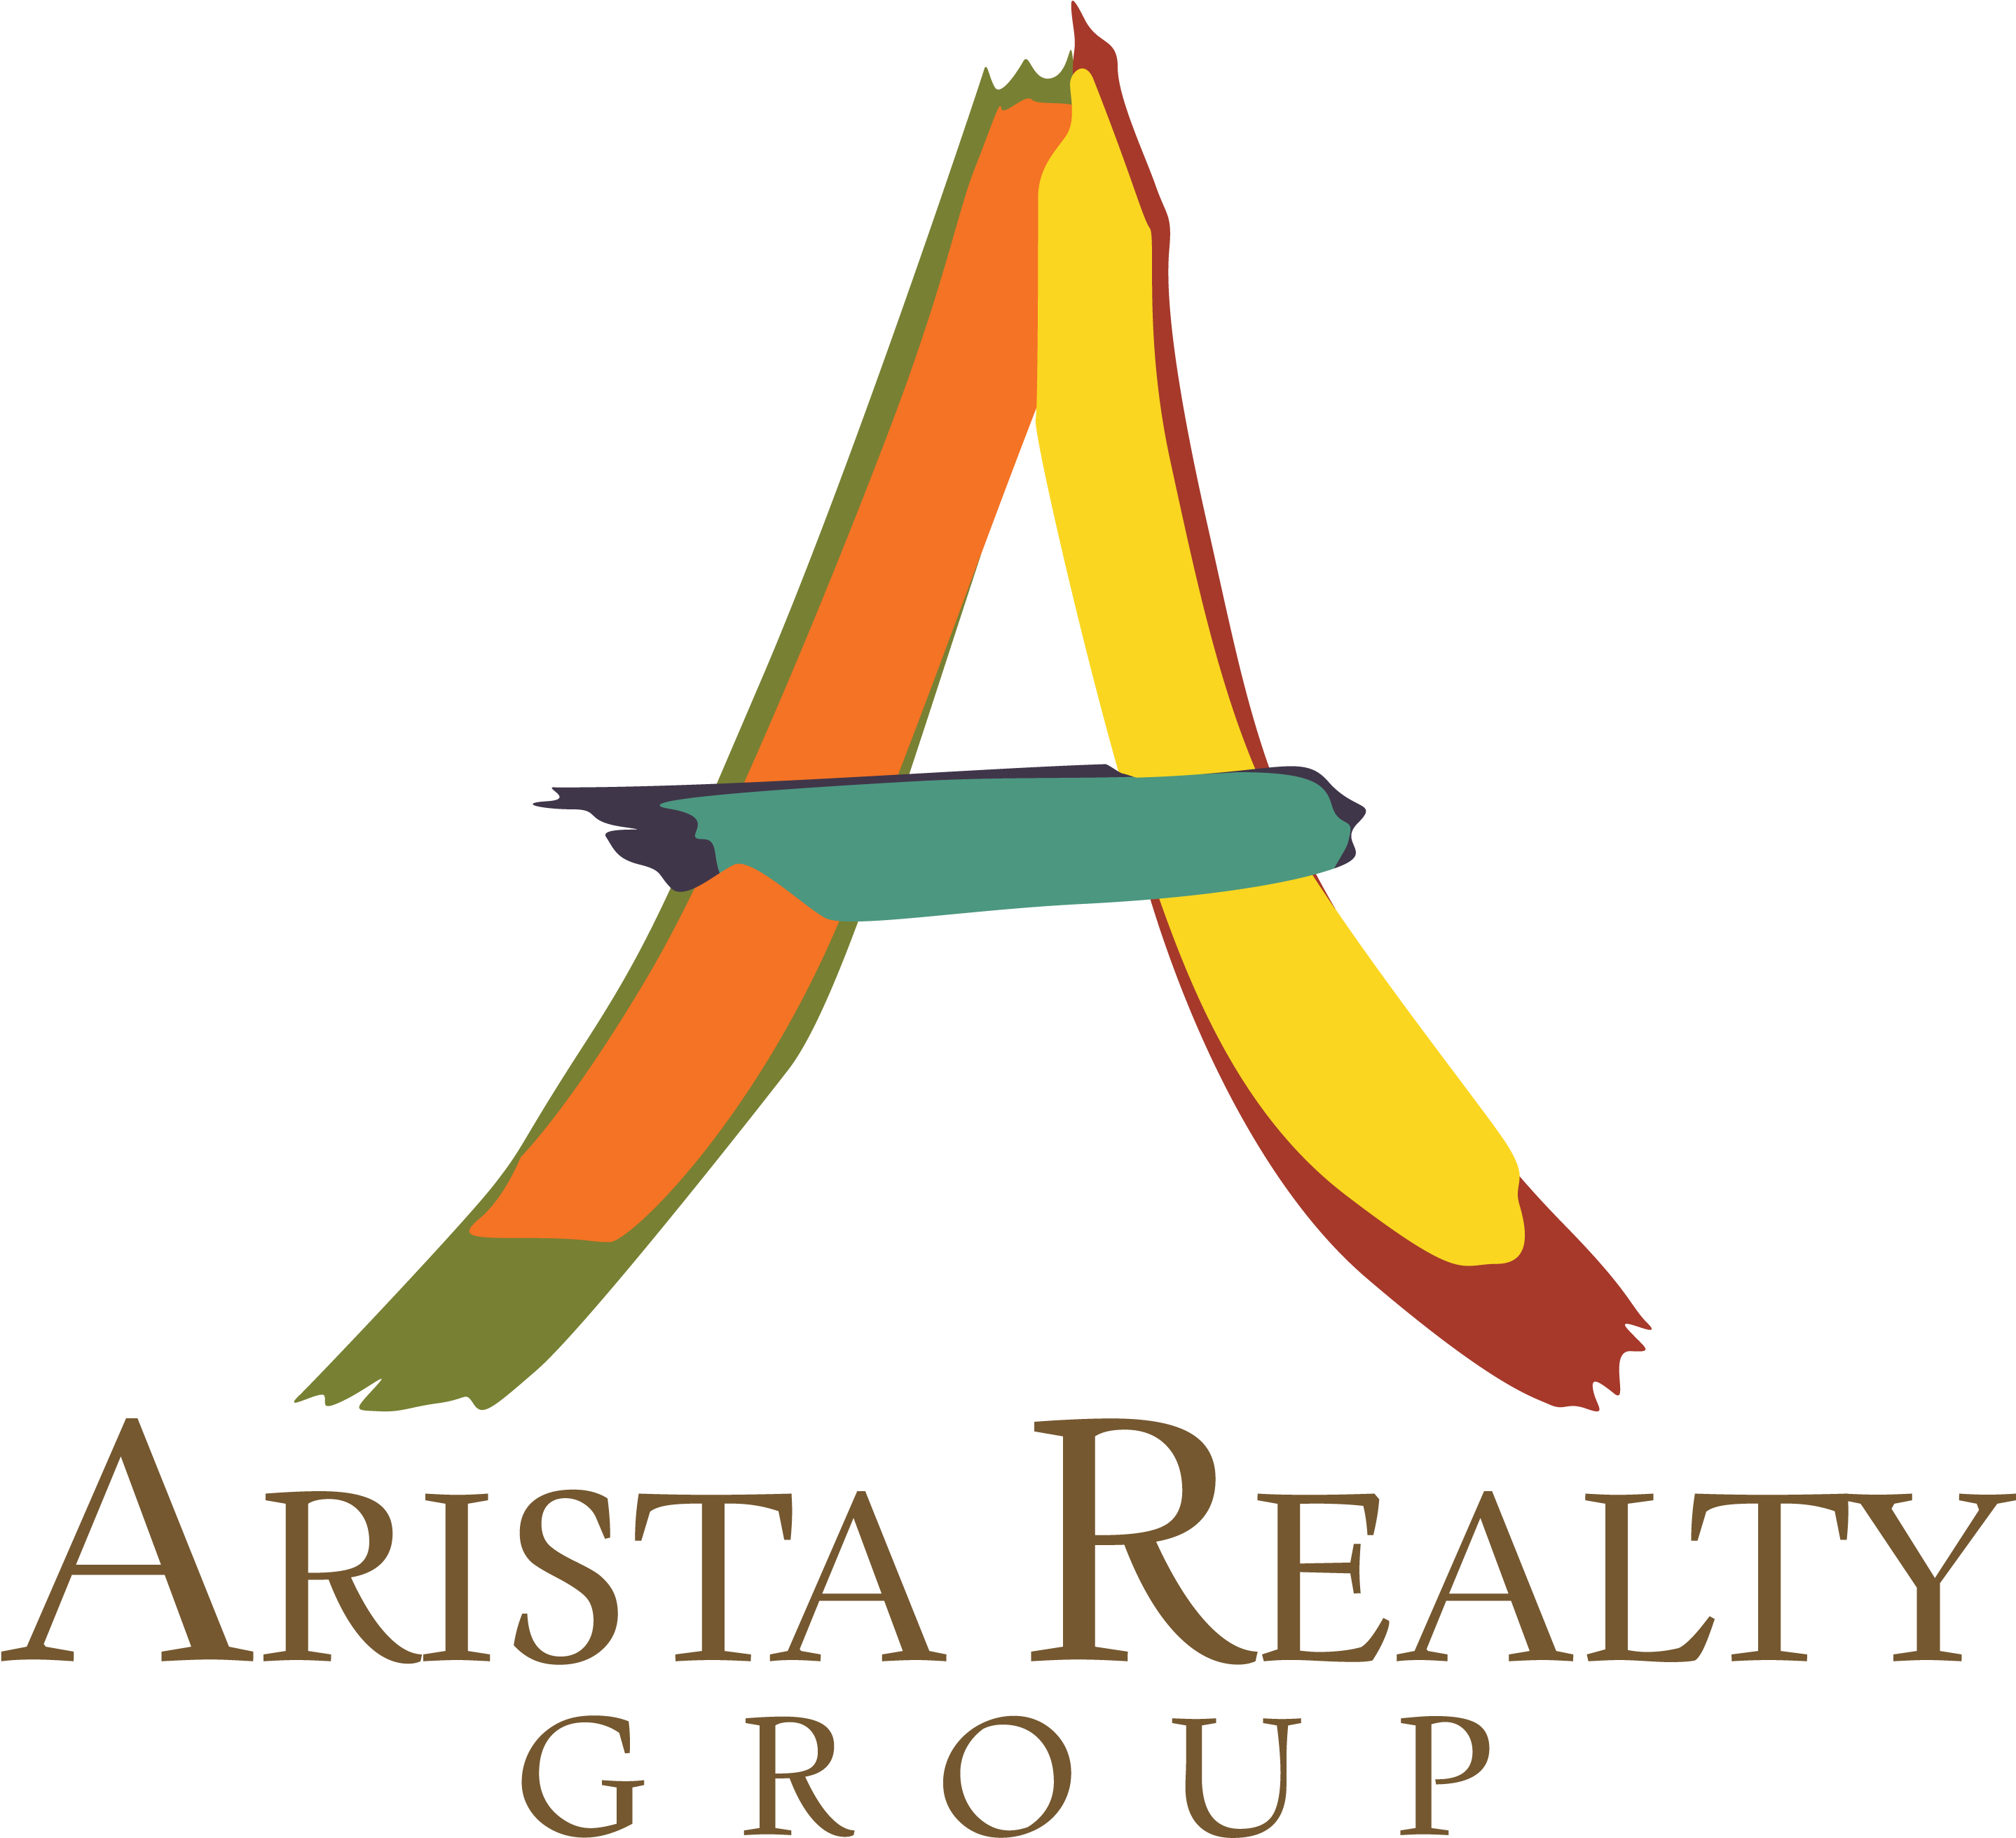 What A Tremendous Year For Arista Realty Group We Have - Arista Realty Group (3000x3000)